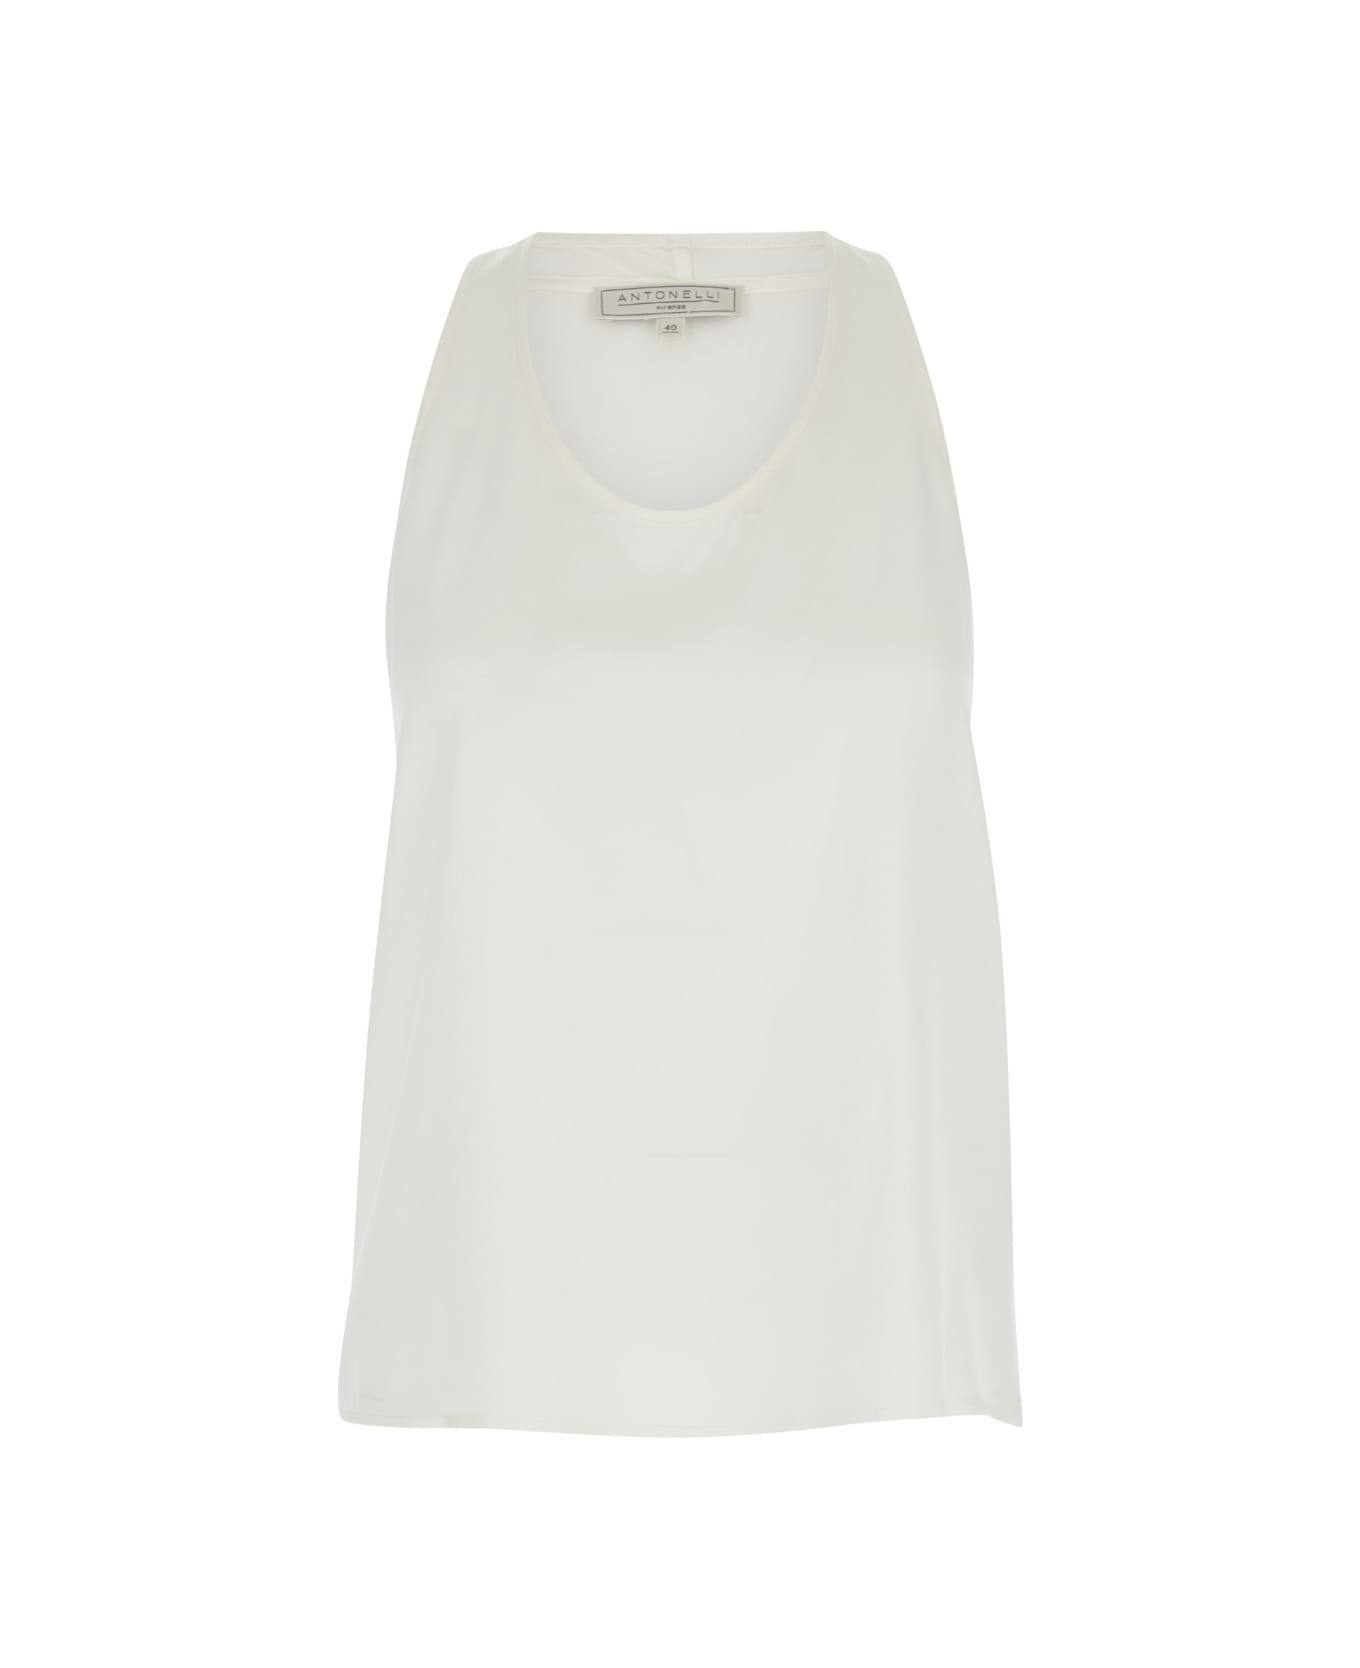 Antonelli White Sleeveless And Flared Top In Silk Blend Woman - White タンクトップ